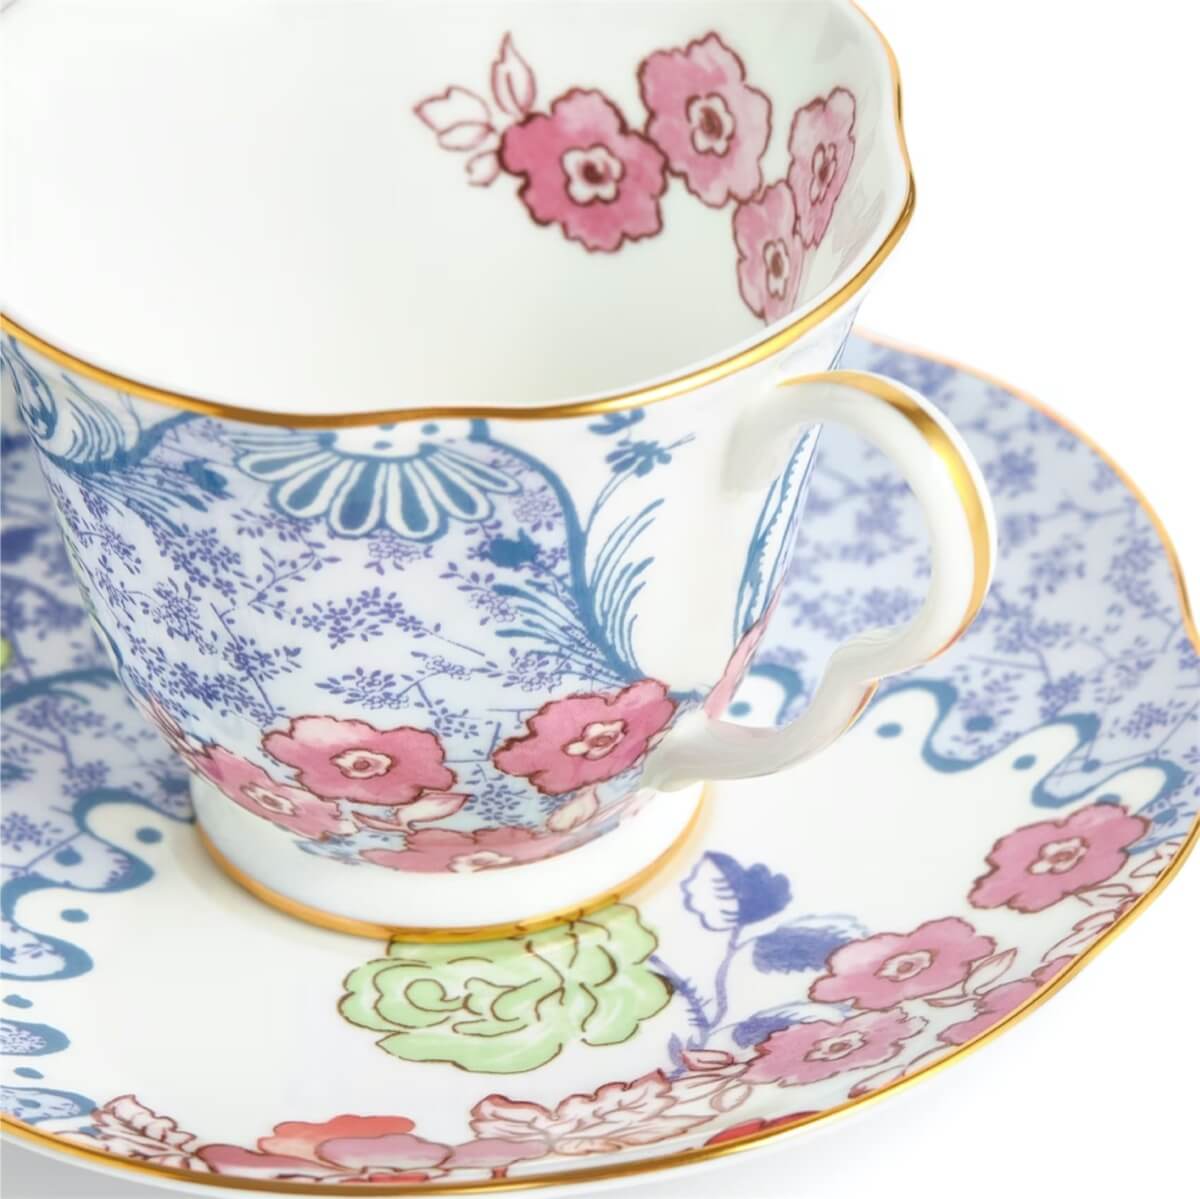 Wedgwood butterfly bloom blue and pink teacup and saucer set